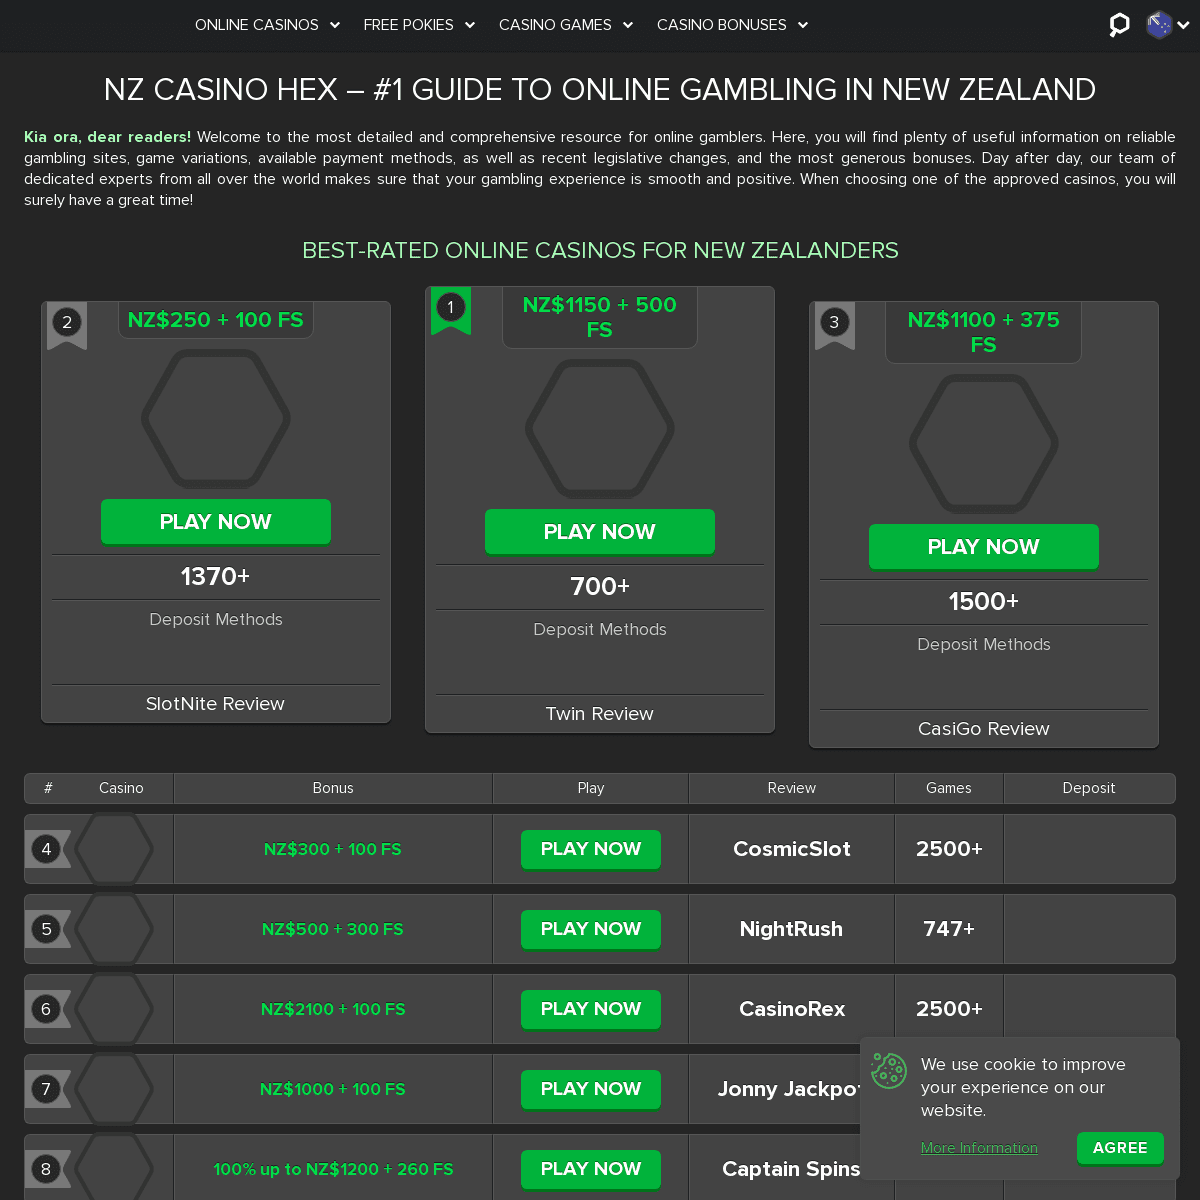 A complete backup of https://nzcasinohex.com